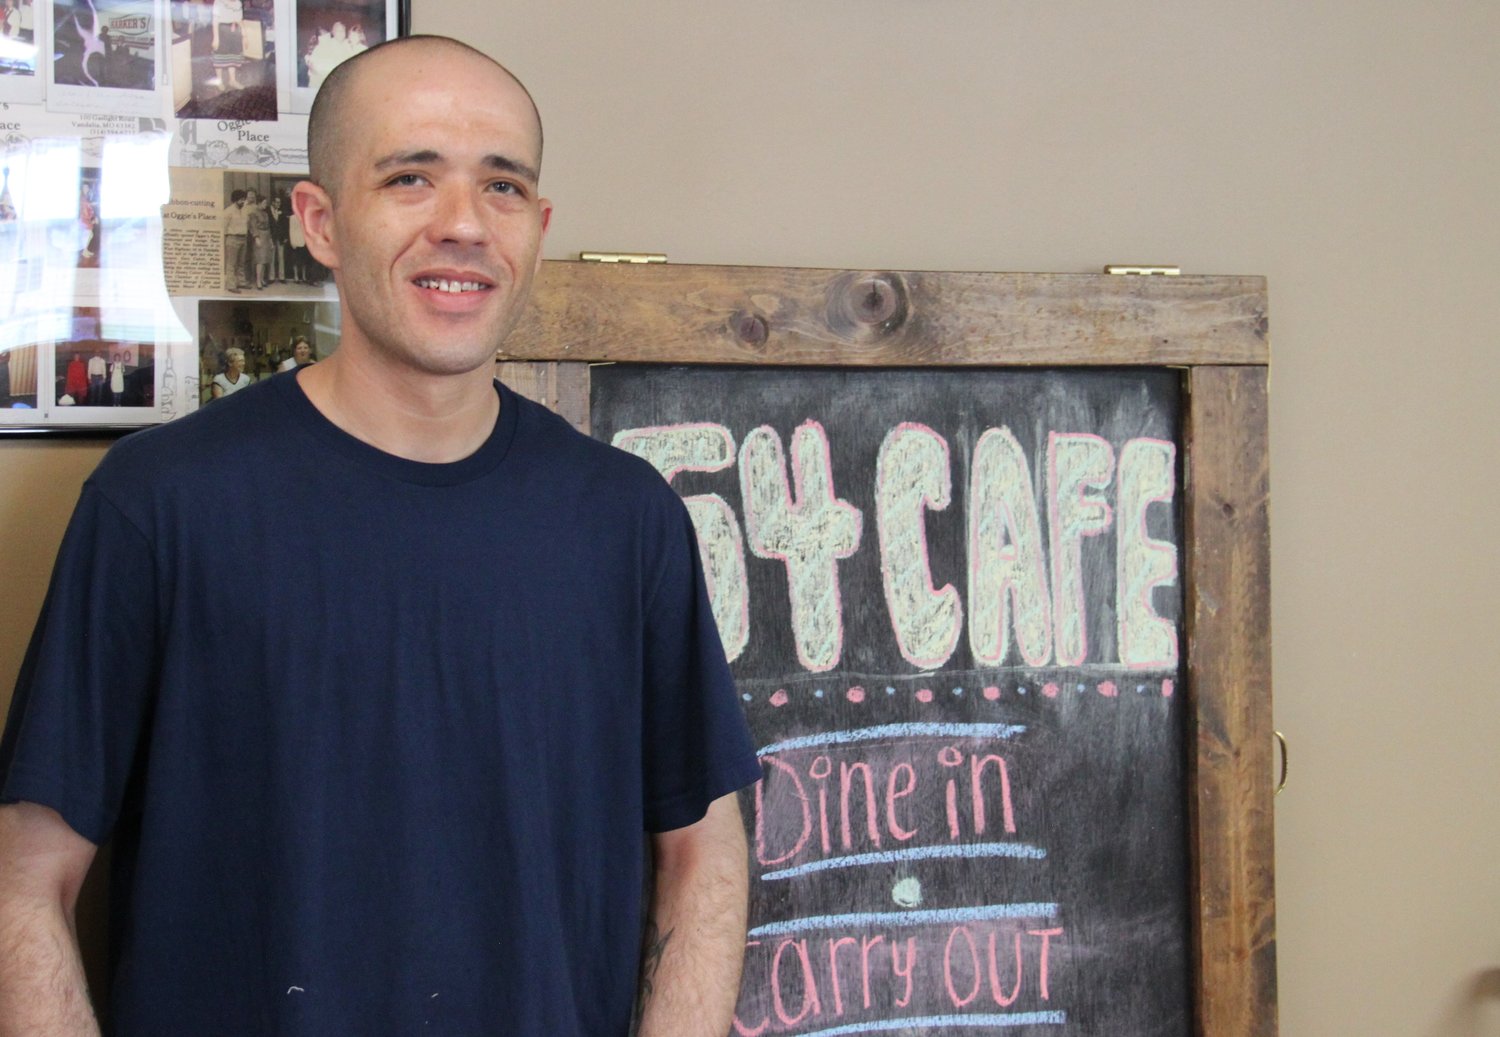 Cafe 54 owner Bret Davis opened his diner in Vandalia earlier this month and it is quickly becoming a popular place. [Dave Faries]